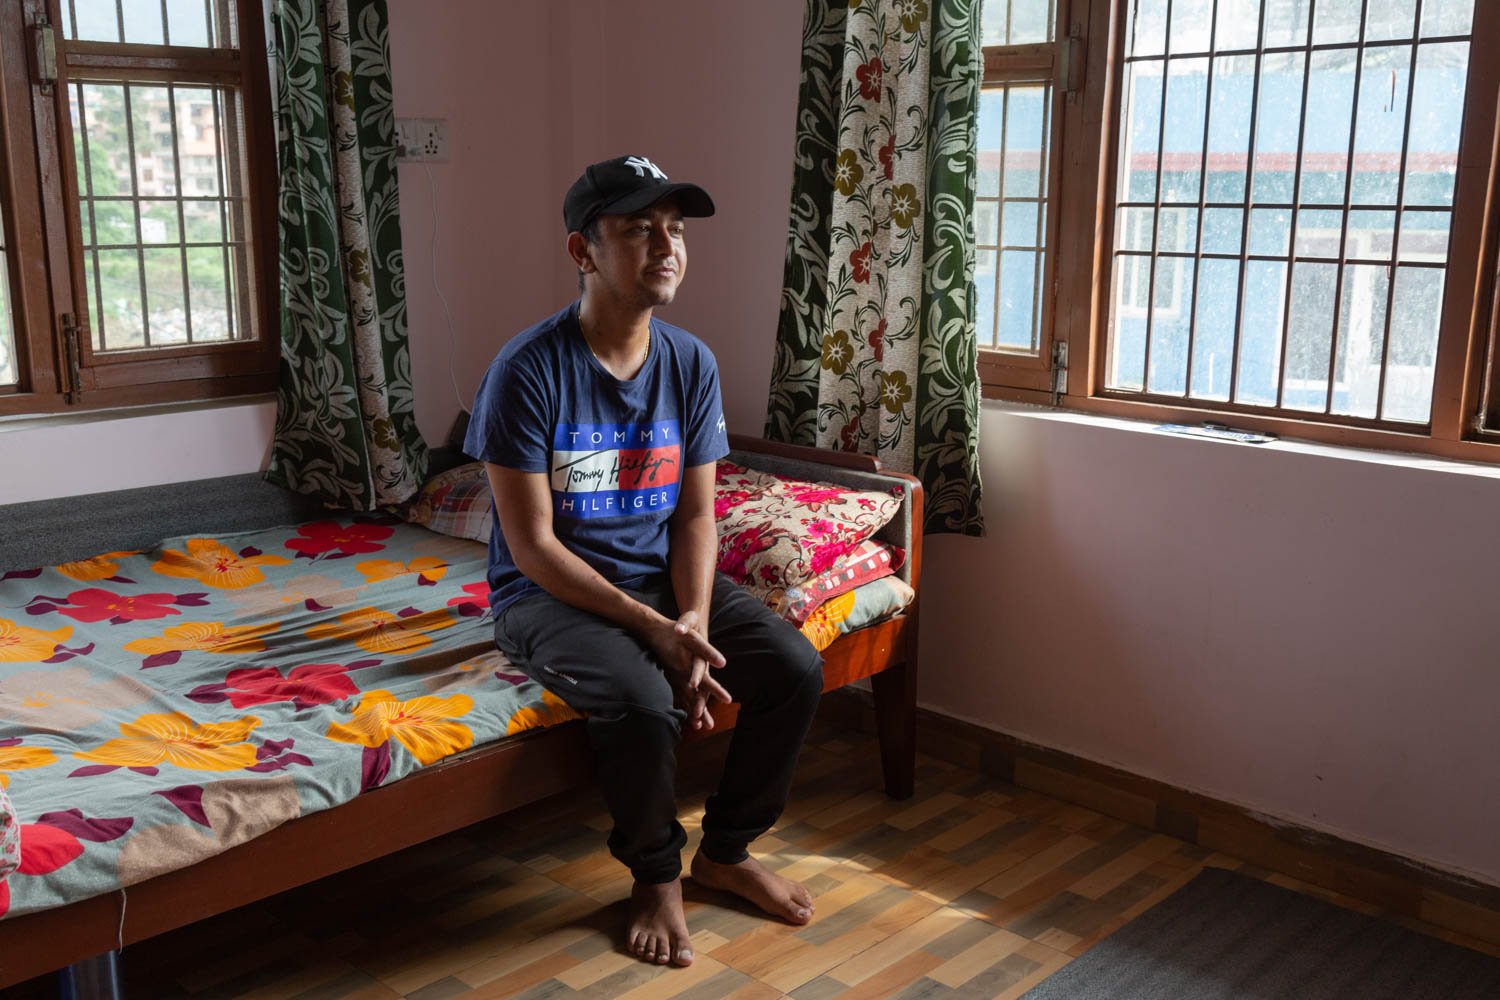  Mahendra Ranabhat, 29, poses on his bed in a rented home in Bhaktapur, Nepal on June 26, 2022.  Ranabhat is living in the Tanahun district in Nepal.  His father, Moti Ram Ranabhat, donated one of his kidneys to his eldest son, who worked in the Gulf